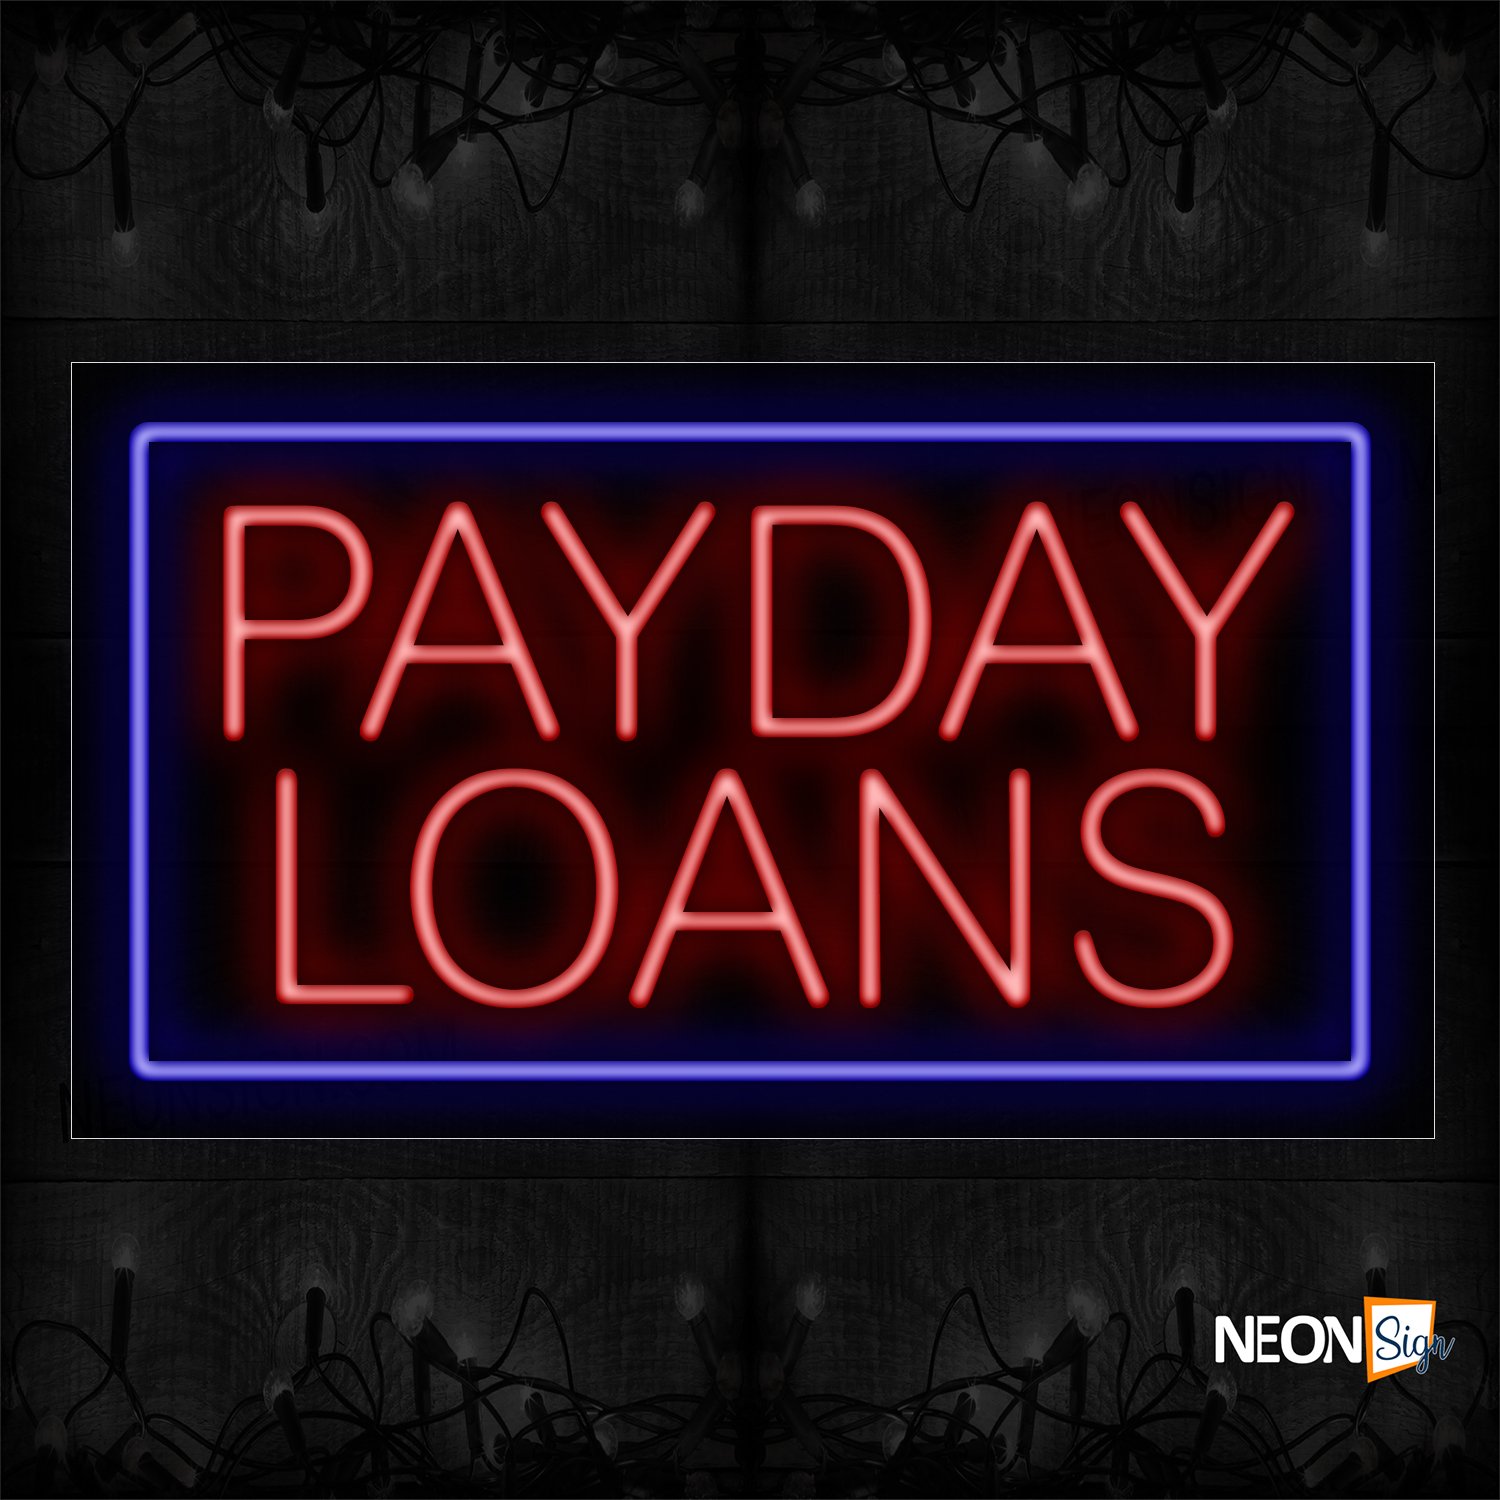 Image of 11107 Payday Loans In Red With Blue Border Neon Sign_20x37 Black Backing